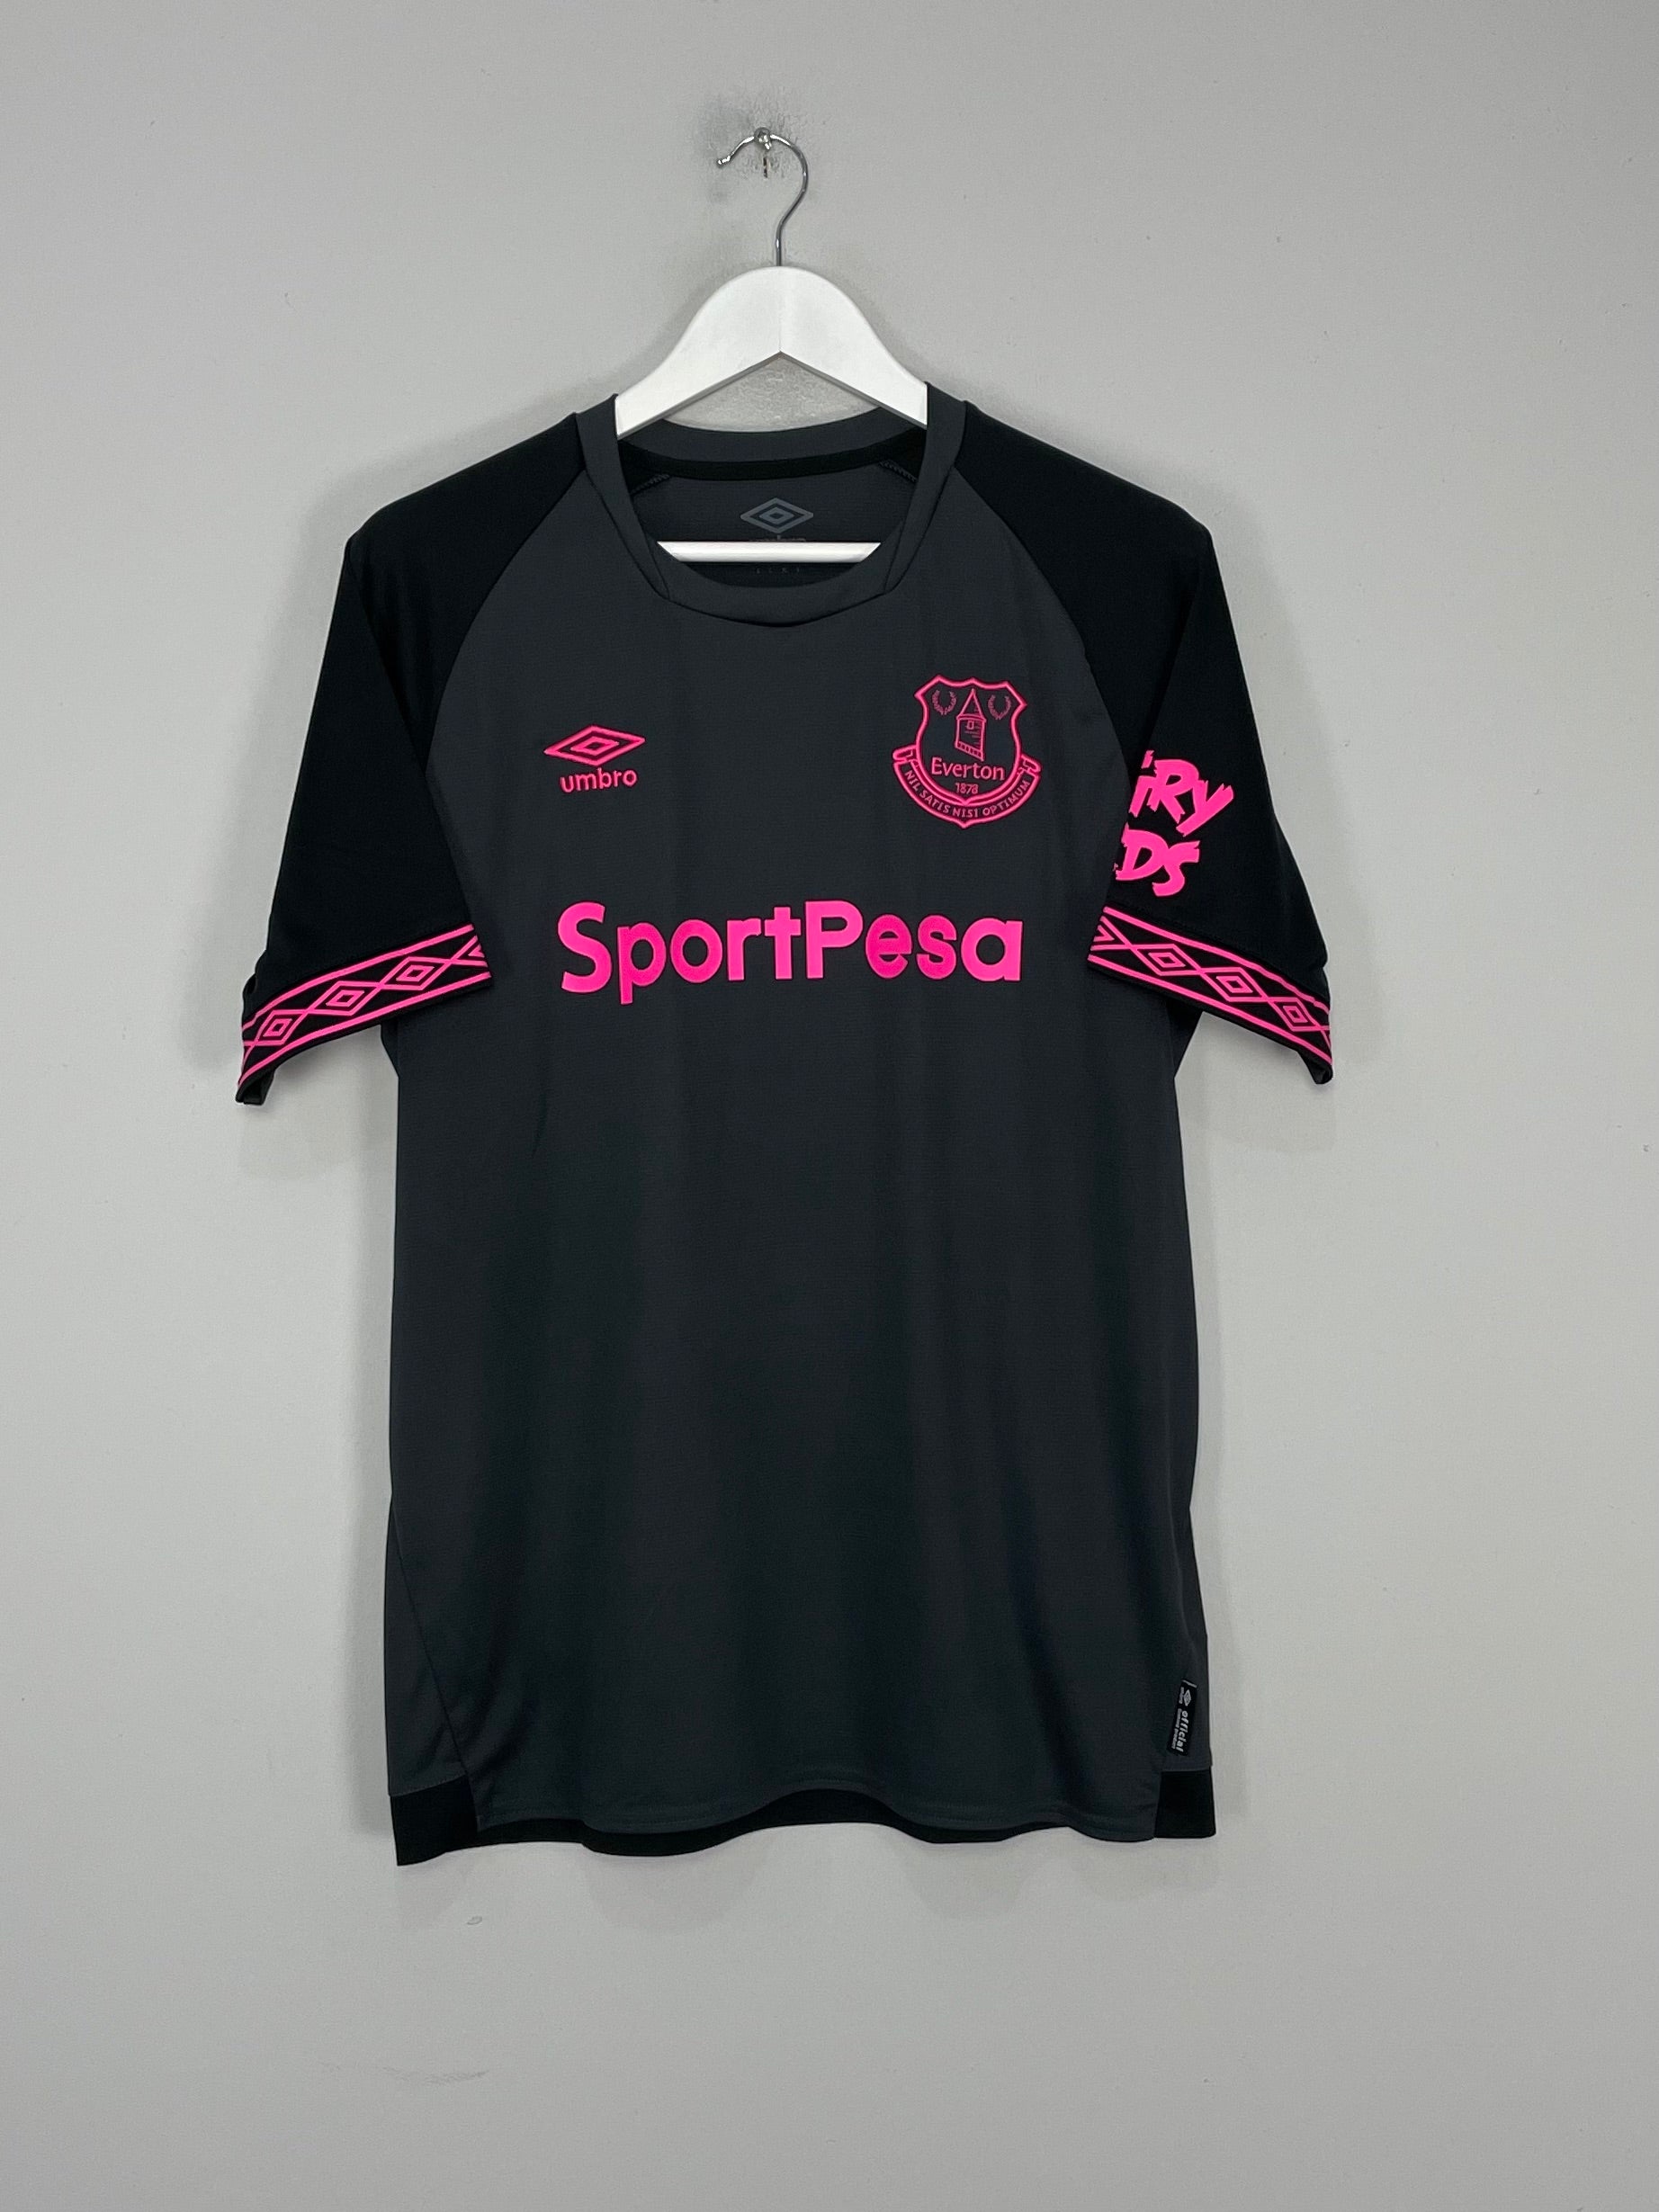 everton jersey for sale